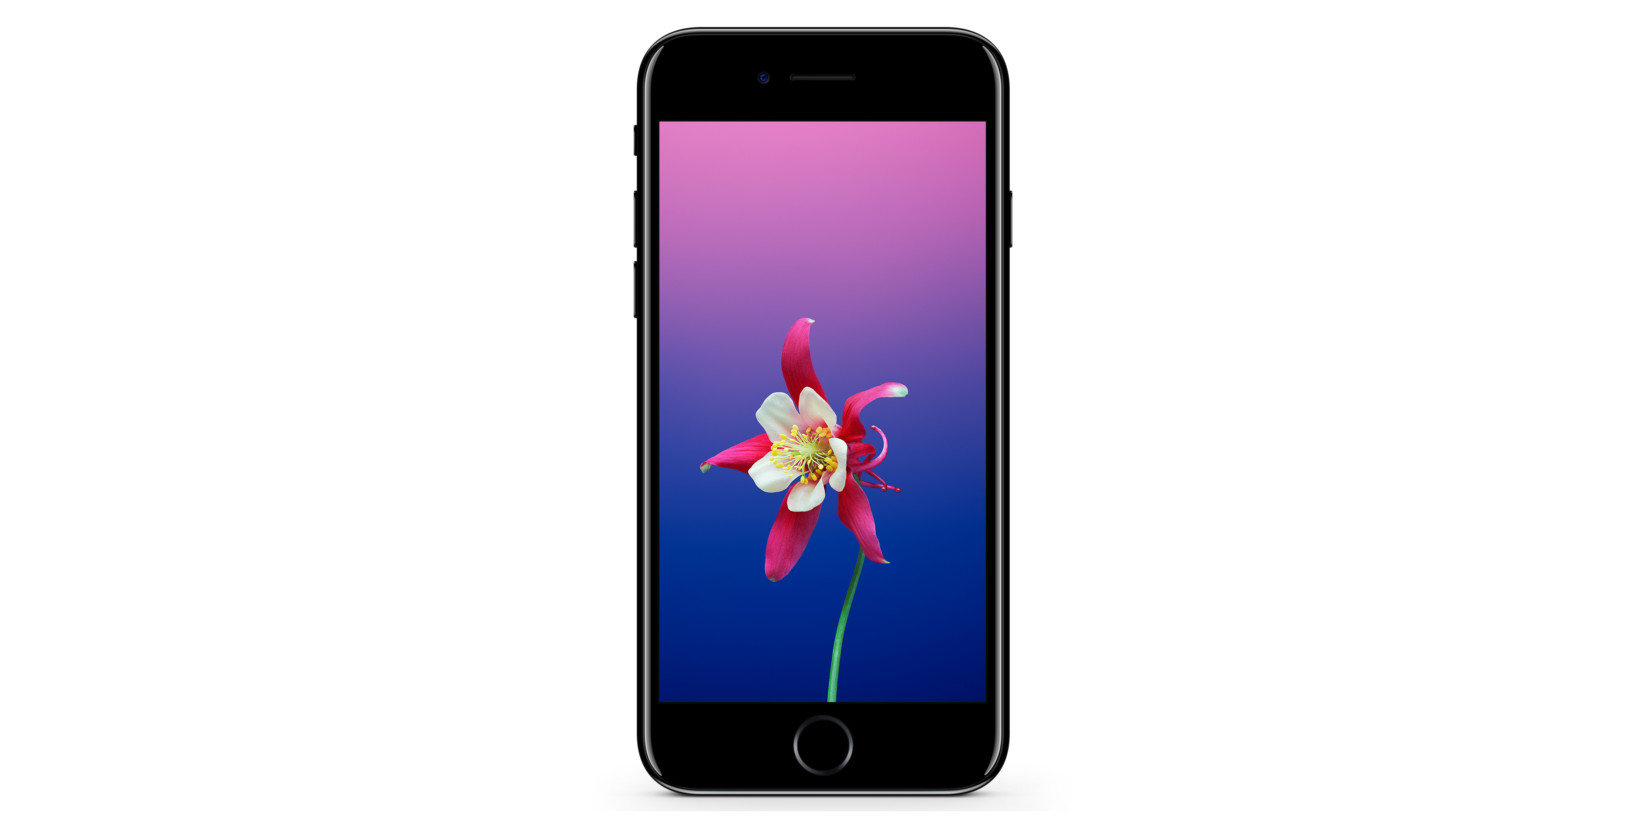 Pretty Up Your Home Screen With 16 New IOS 11 Wallpapers